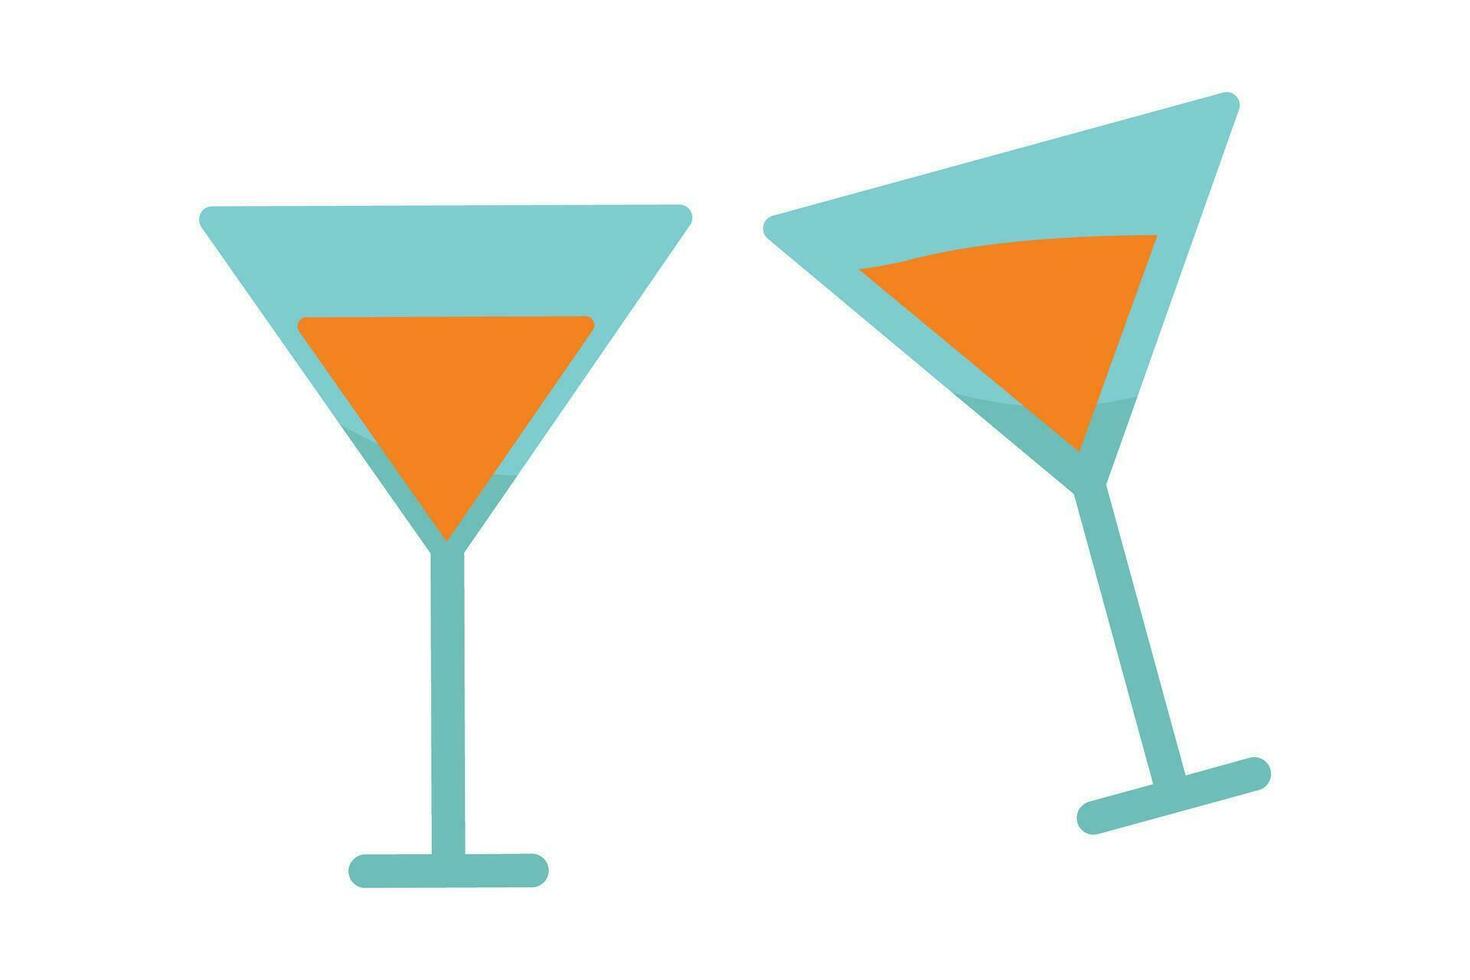 cocktail glass vector element illustration. flat icon style. suitable for party element